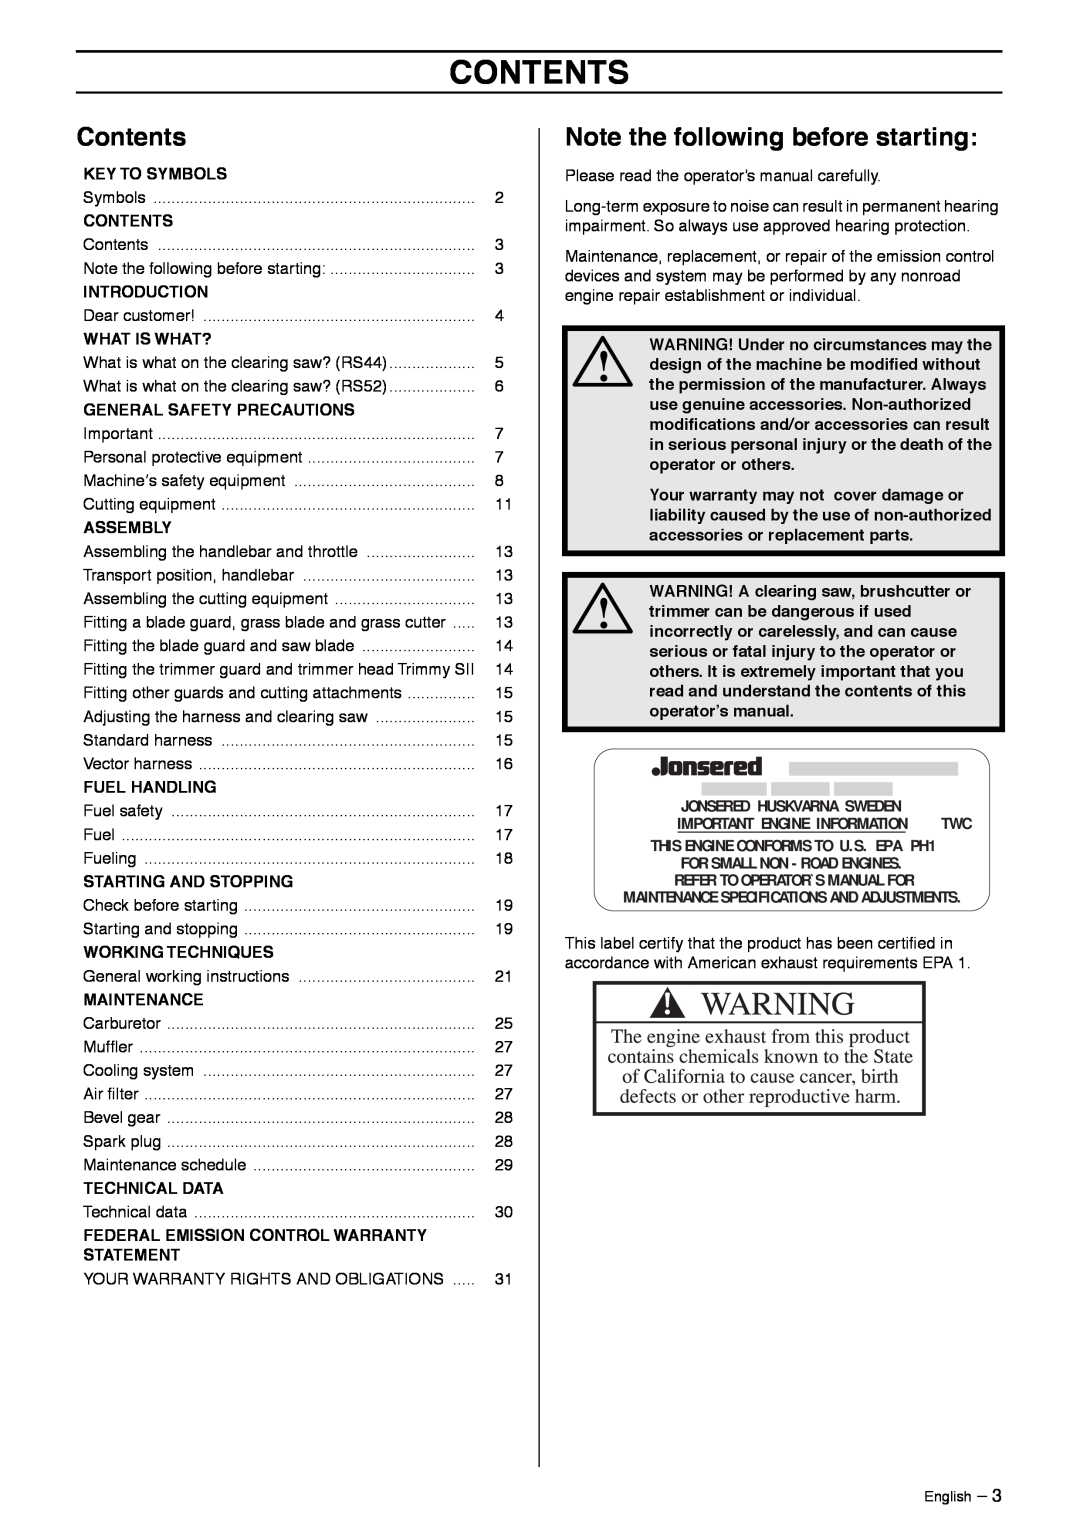 Jonsered GR41/50 manual Contents, Note the following before starting, Key To Symbols, Introduction, What Is What?, Assembly 